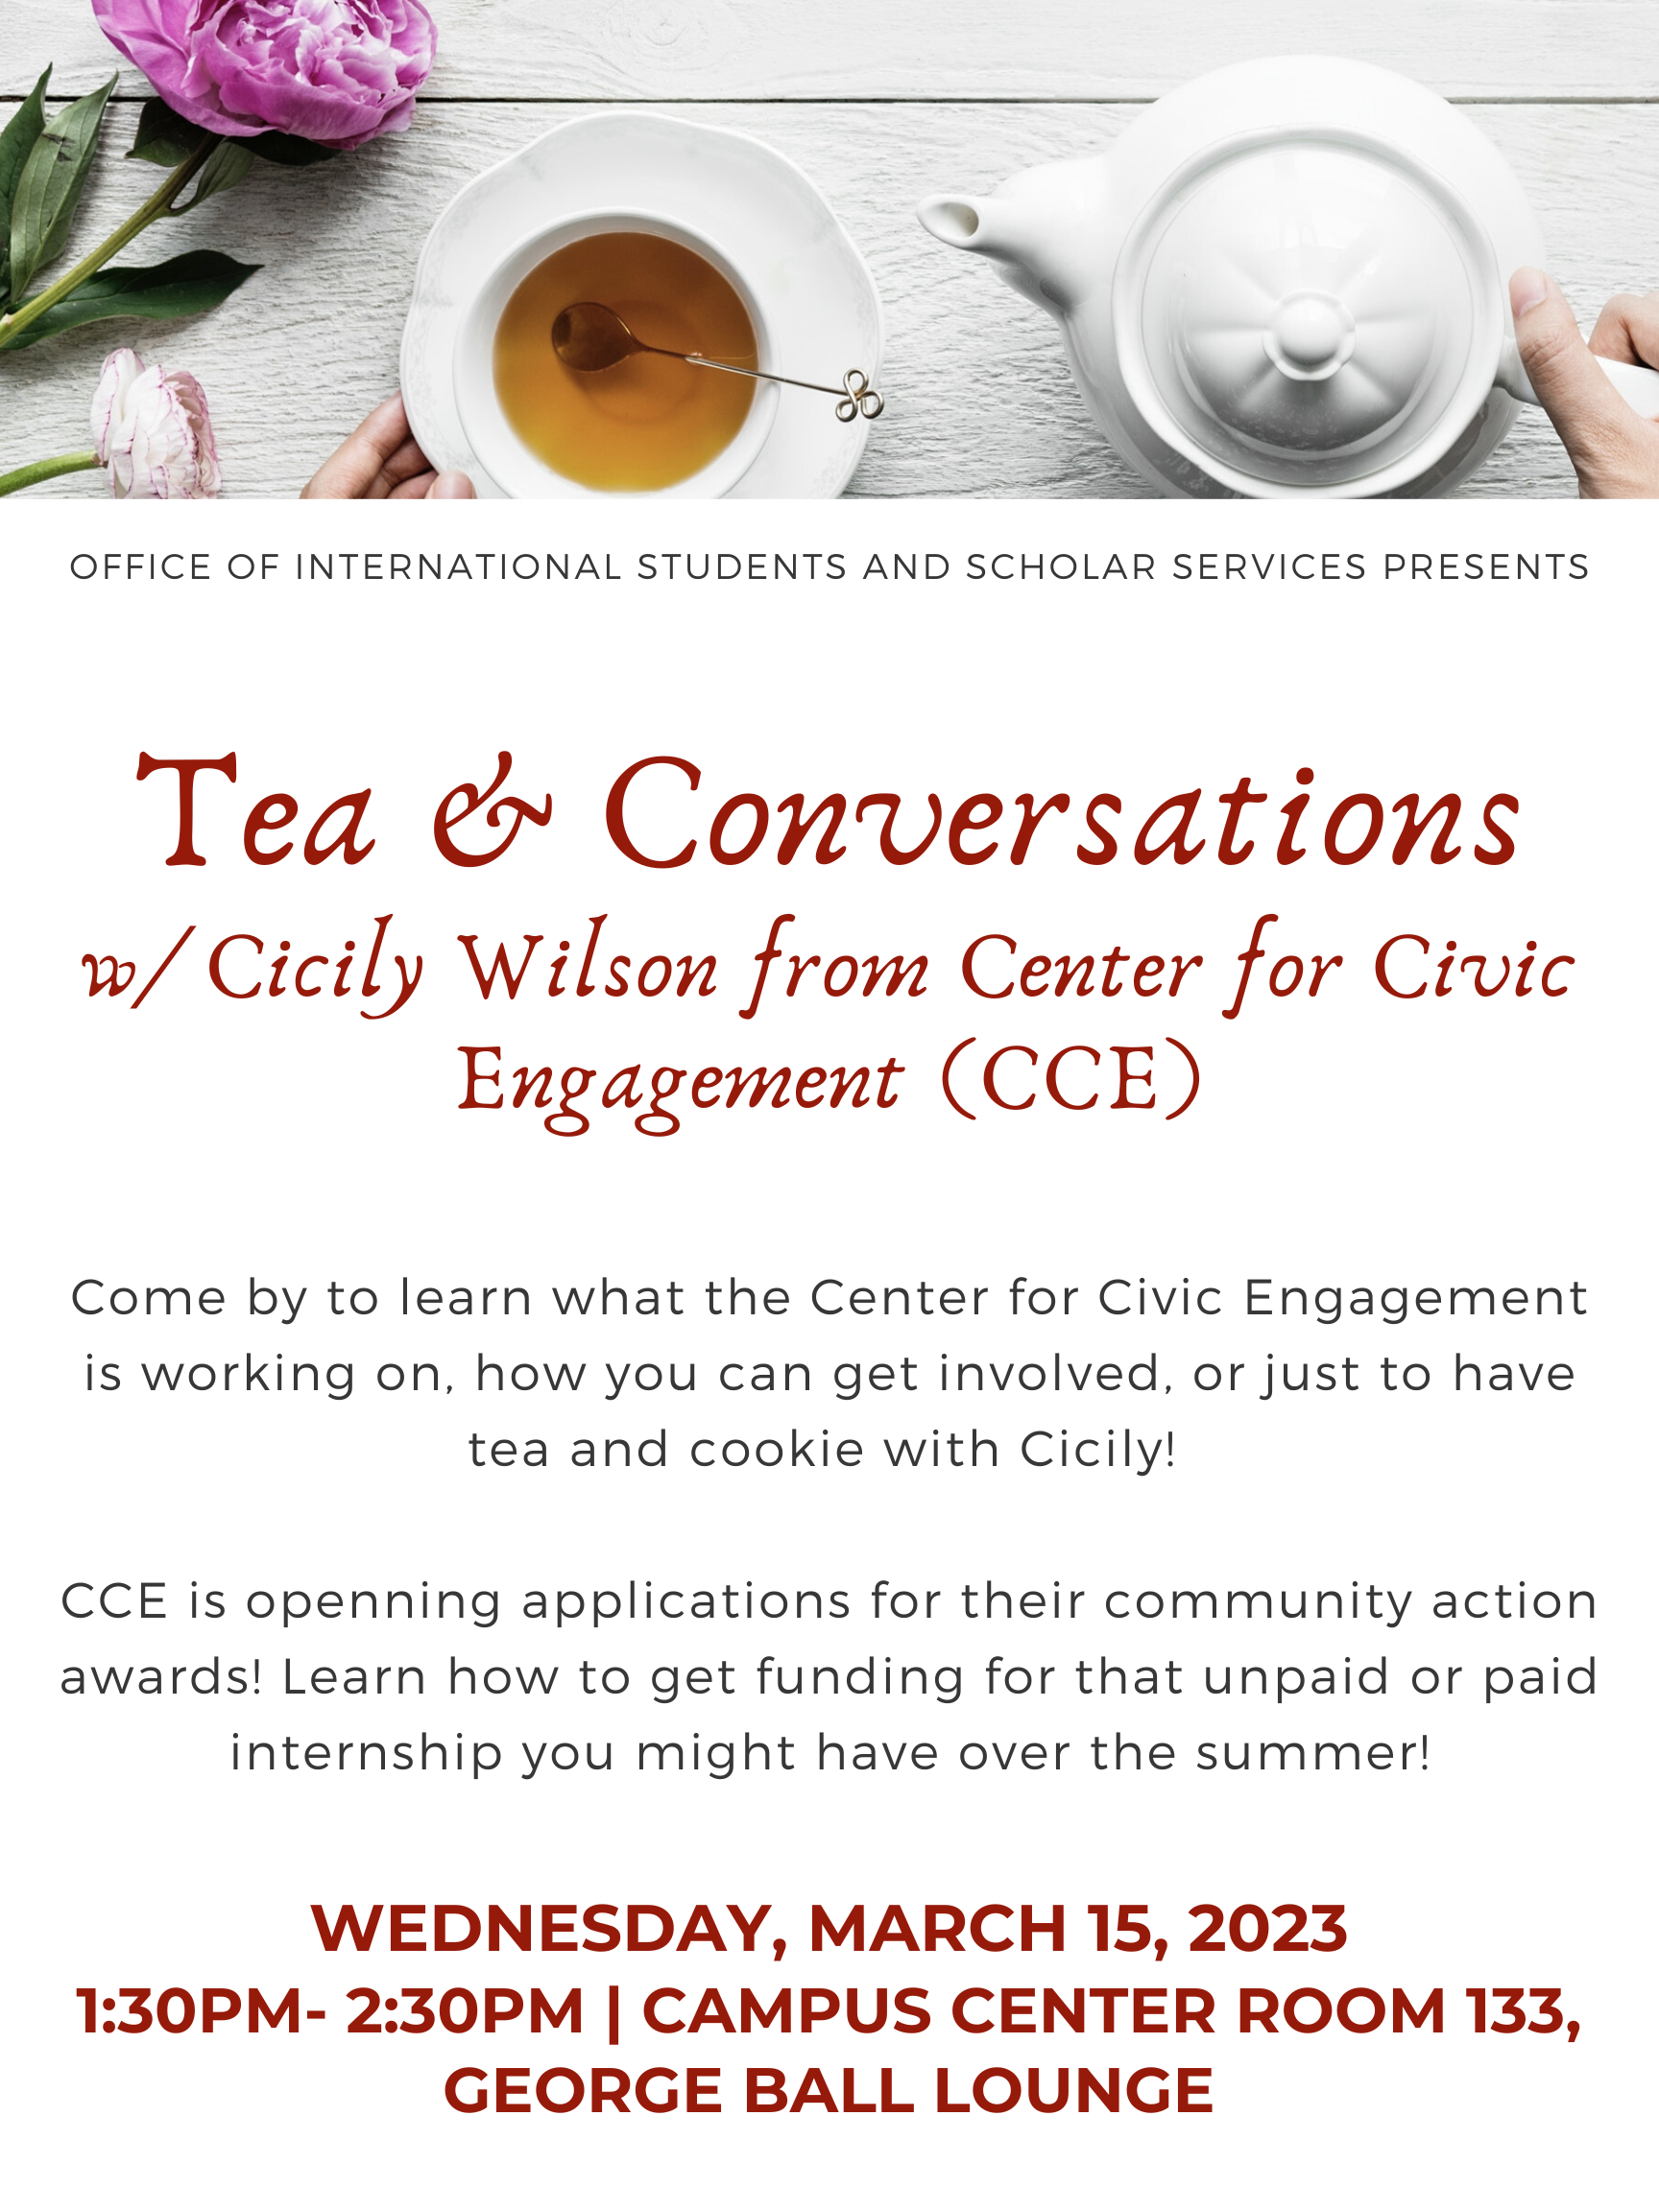 Tea and Conversations for International Students with Cicily Wilson from the Center for Civic Engagement (CCE)